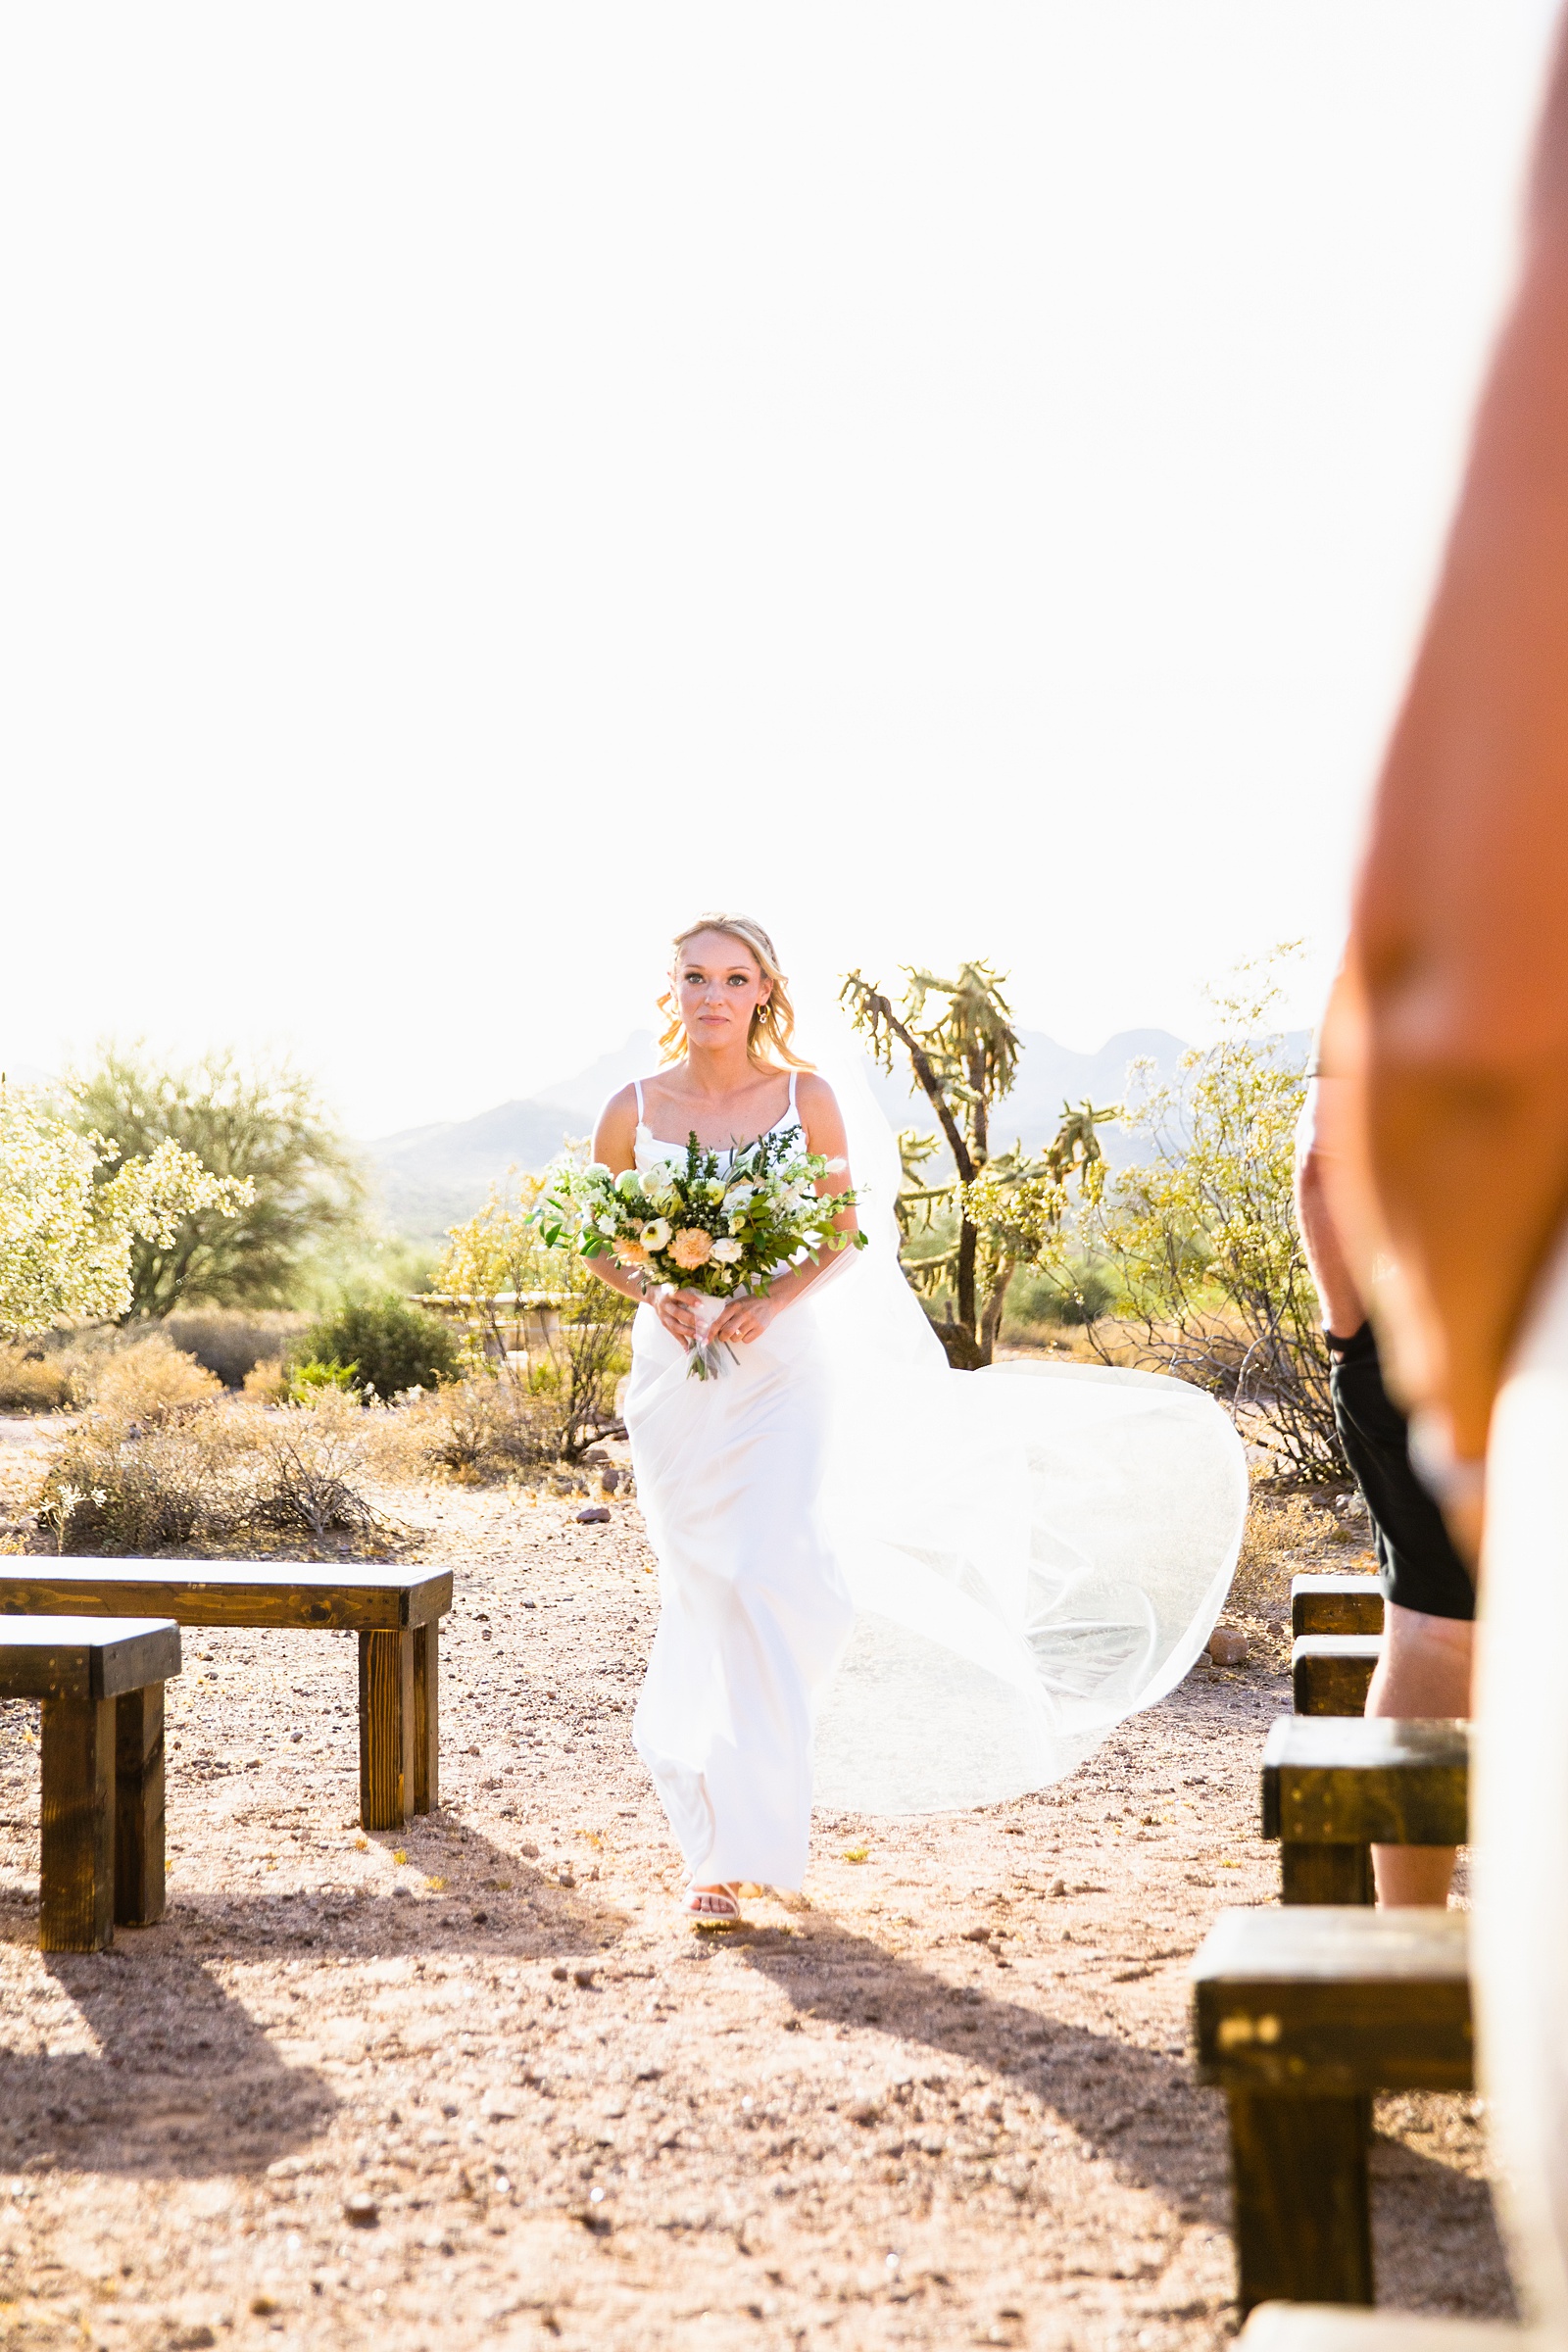 Bride walking down aisle during Superstition Mountain Micro wedding ceremony by Phoenix wedding photographer PMA Photography.